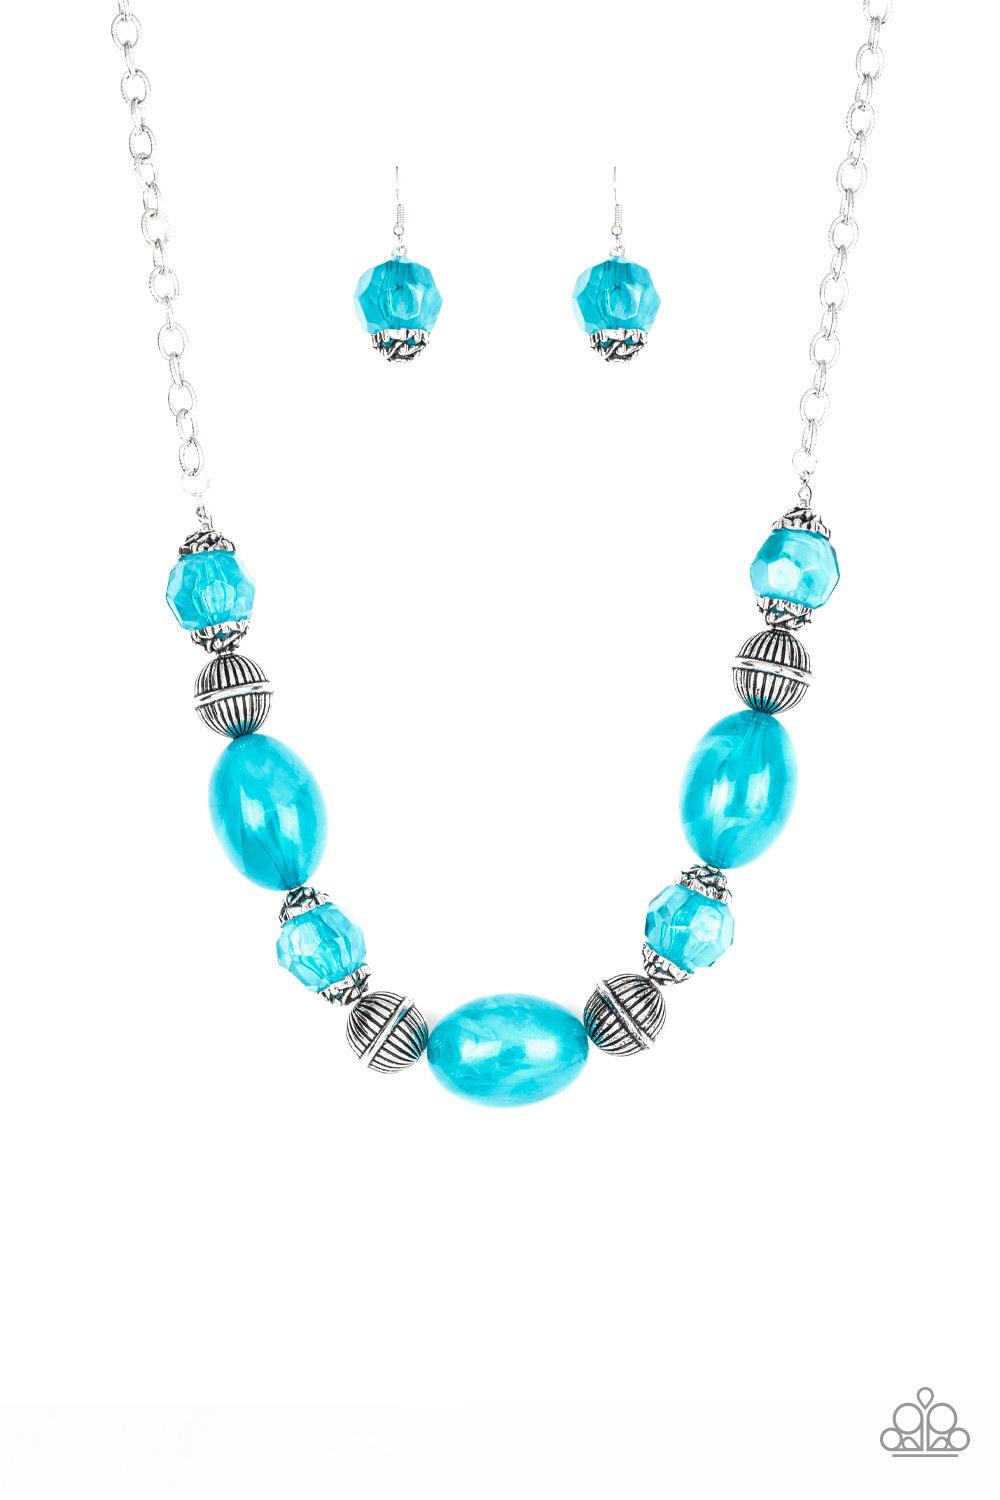 Paparazzi Accessories Ice Melt - Blue Featuring an array of antiqued silver beads, an icy collection of oversized glassy blue beads are threaded along an invisible wire below the collar for a colorful, statement making look. Features an adjustable clasp c